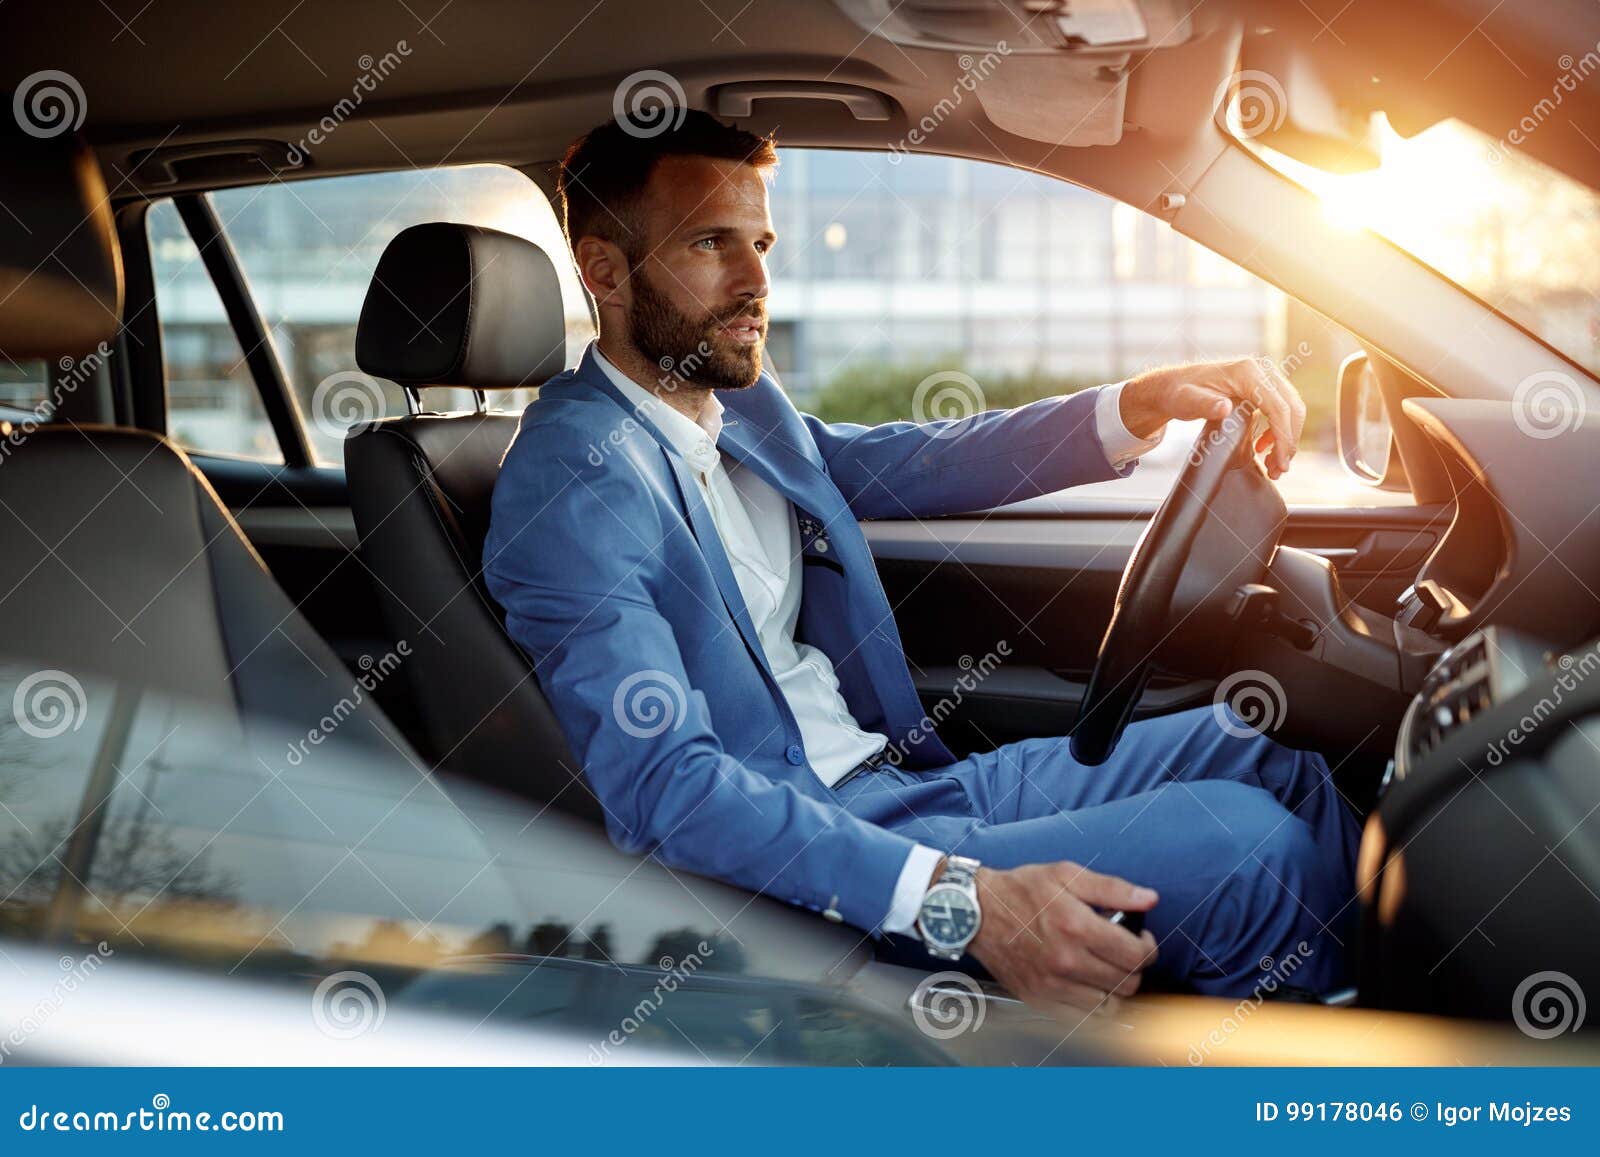 attractive man in business suit driving car